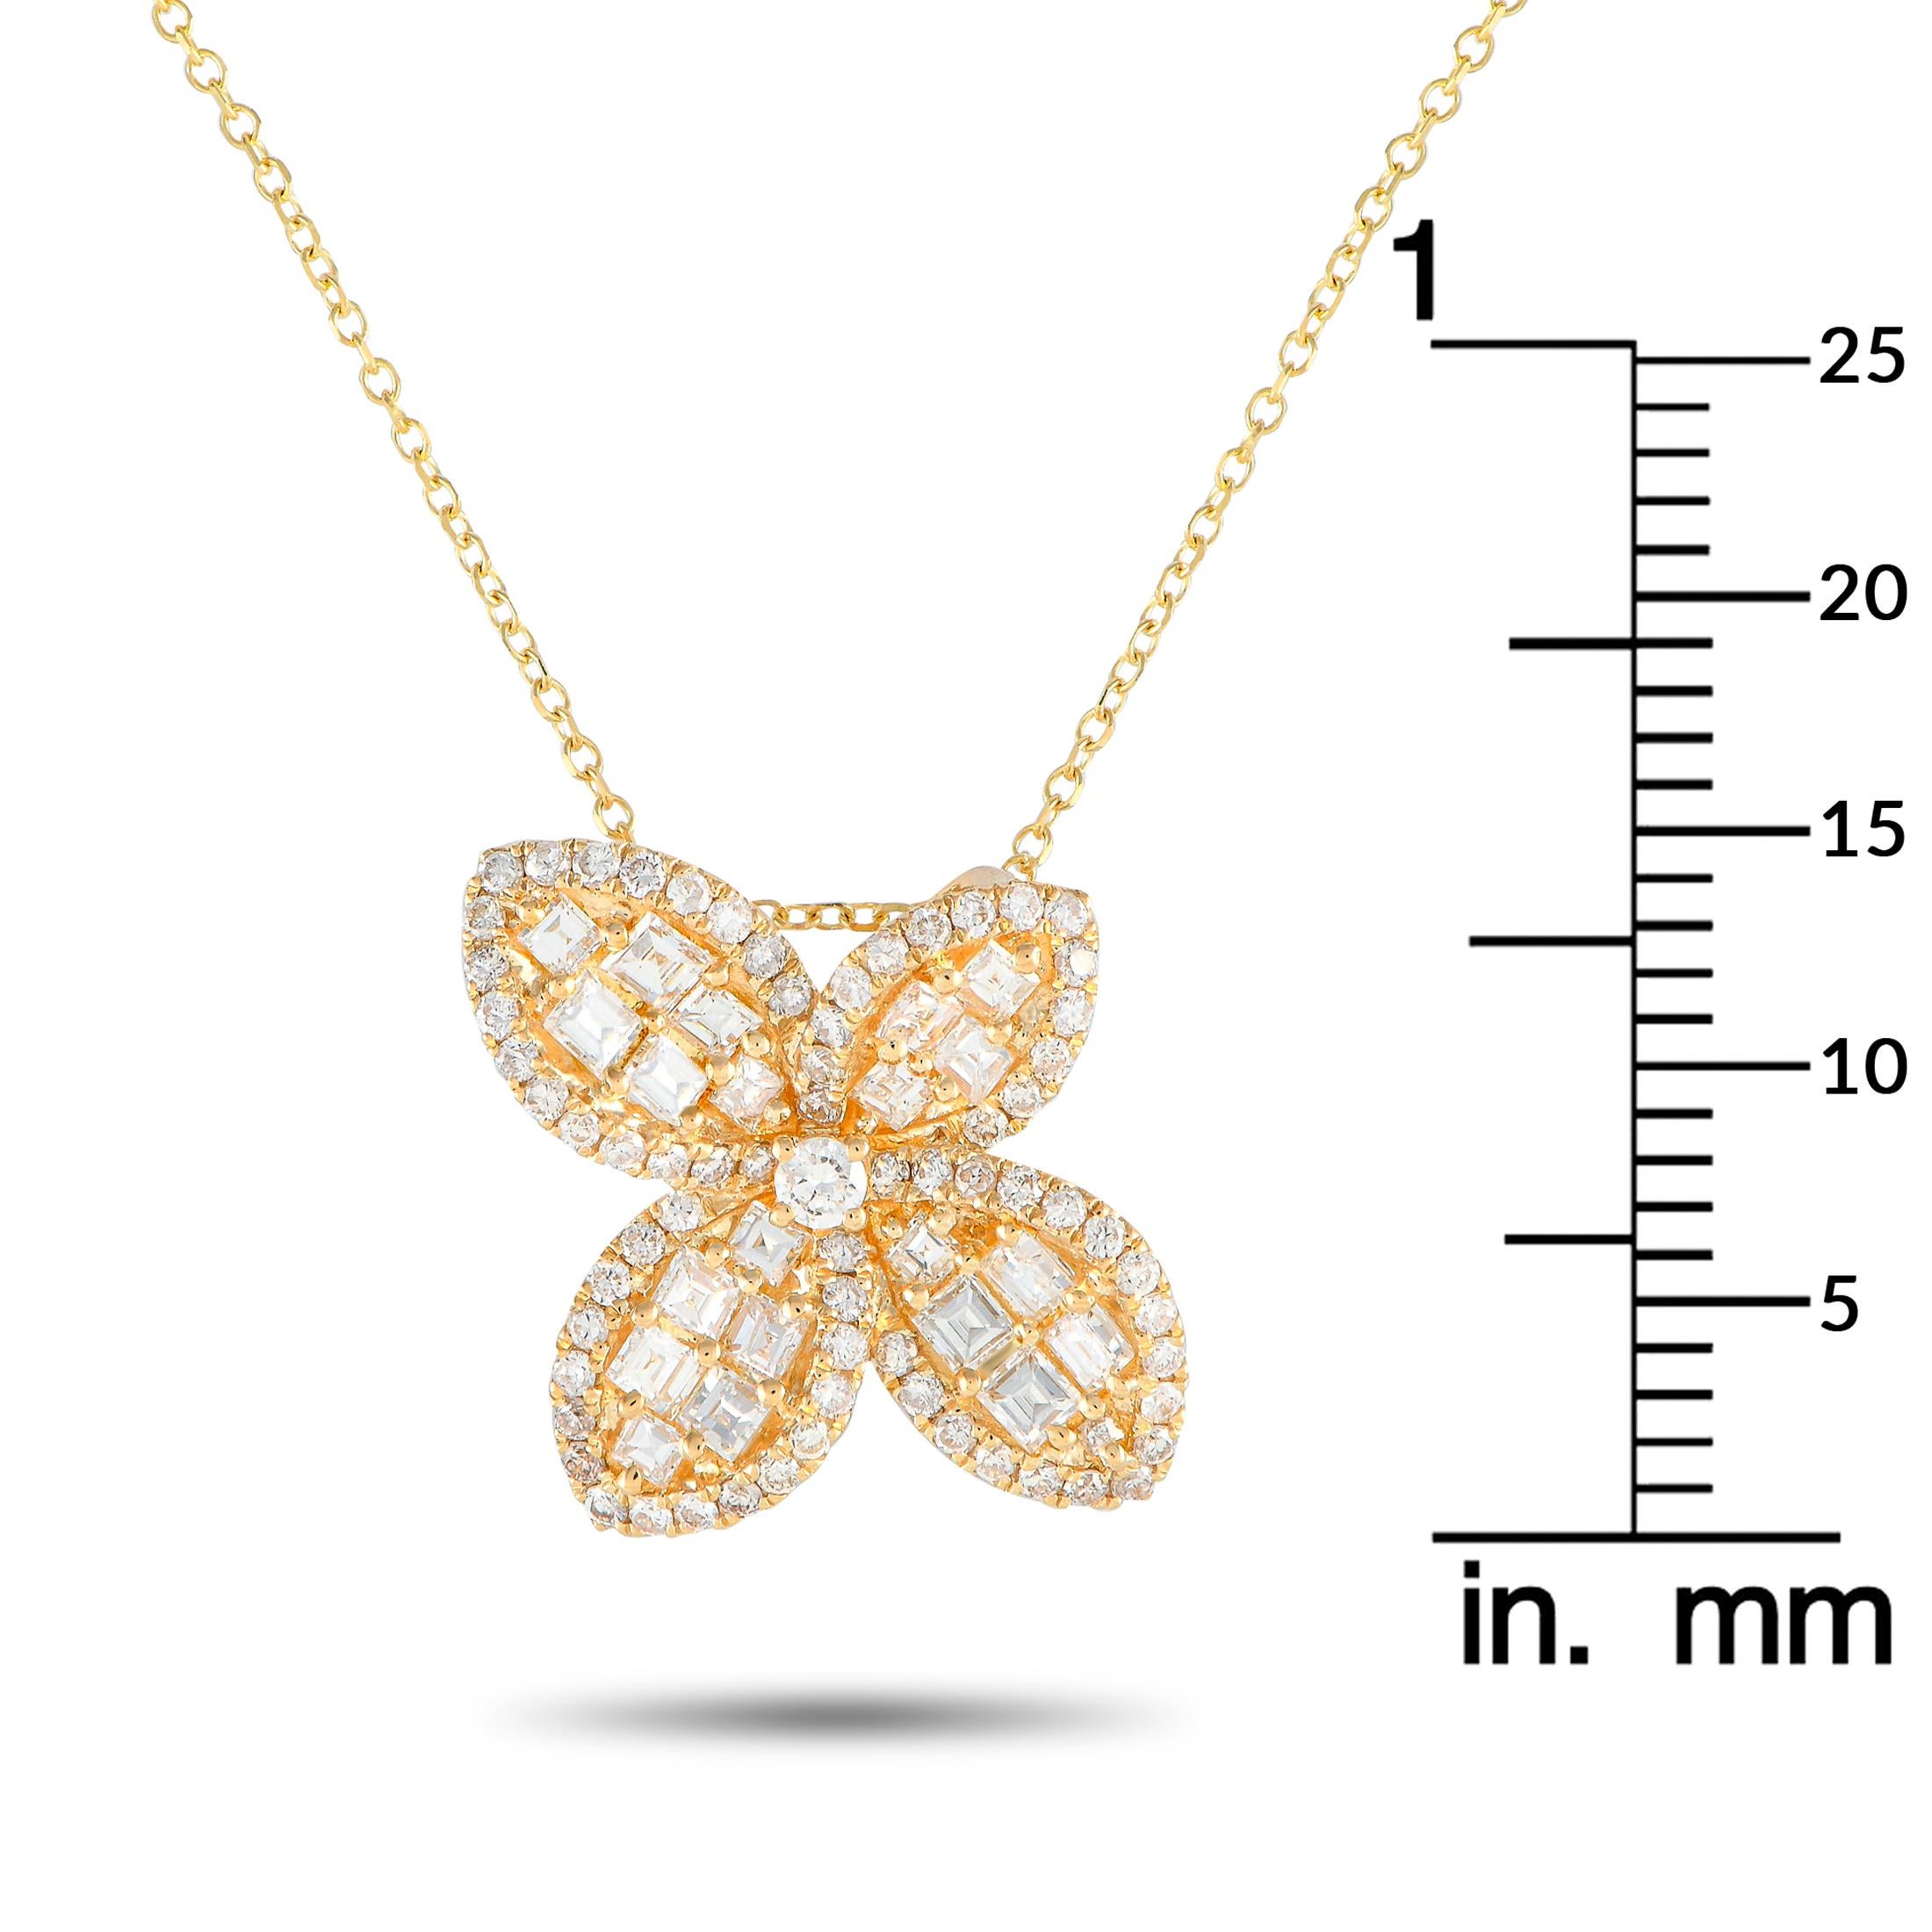 LB Exclusive 18K Yellow Gold 1.10ct Diamond Necklace In New Condition For Sale In Southampton, PA